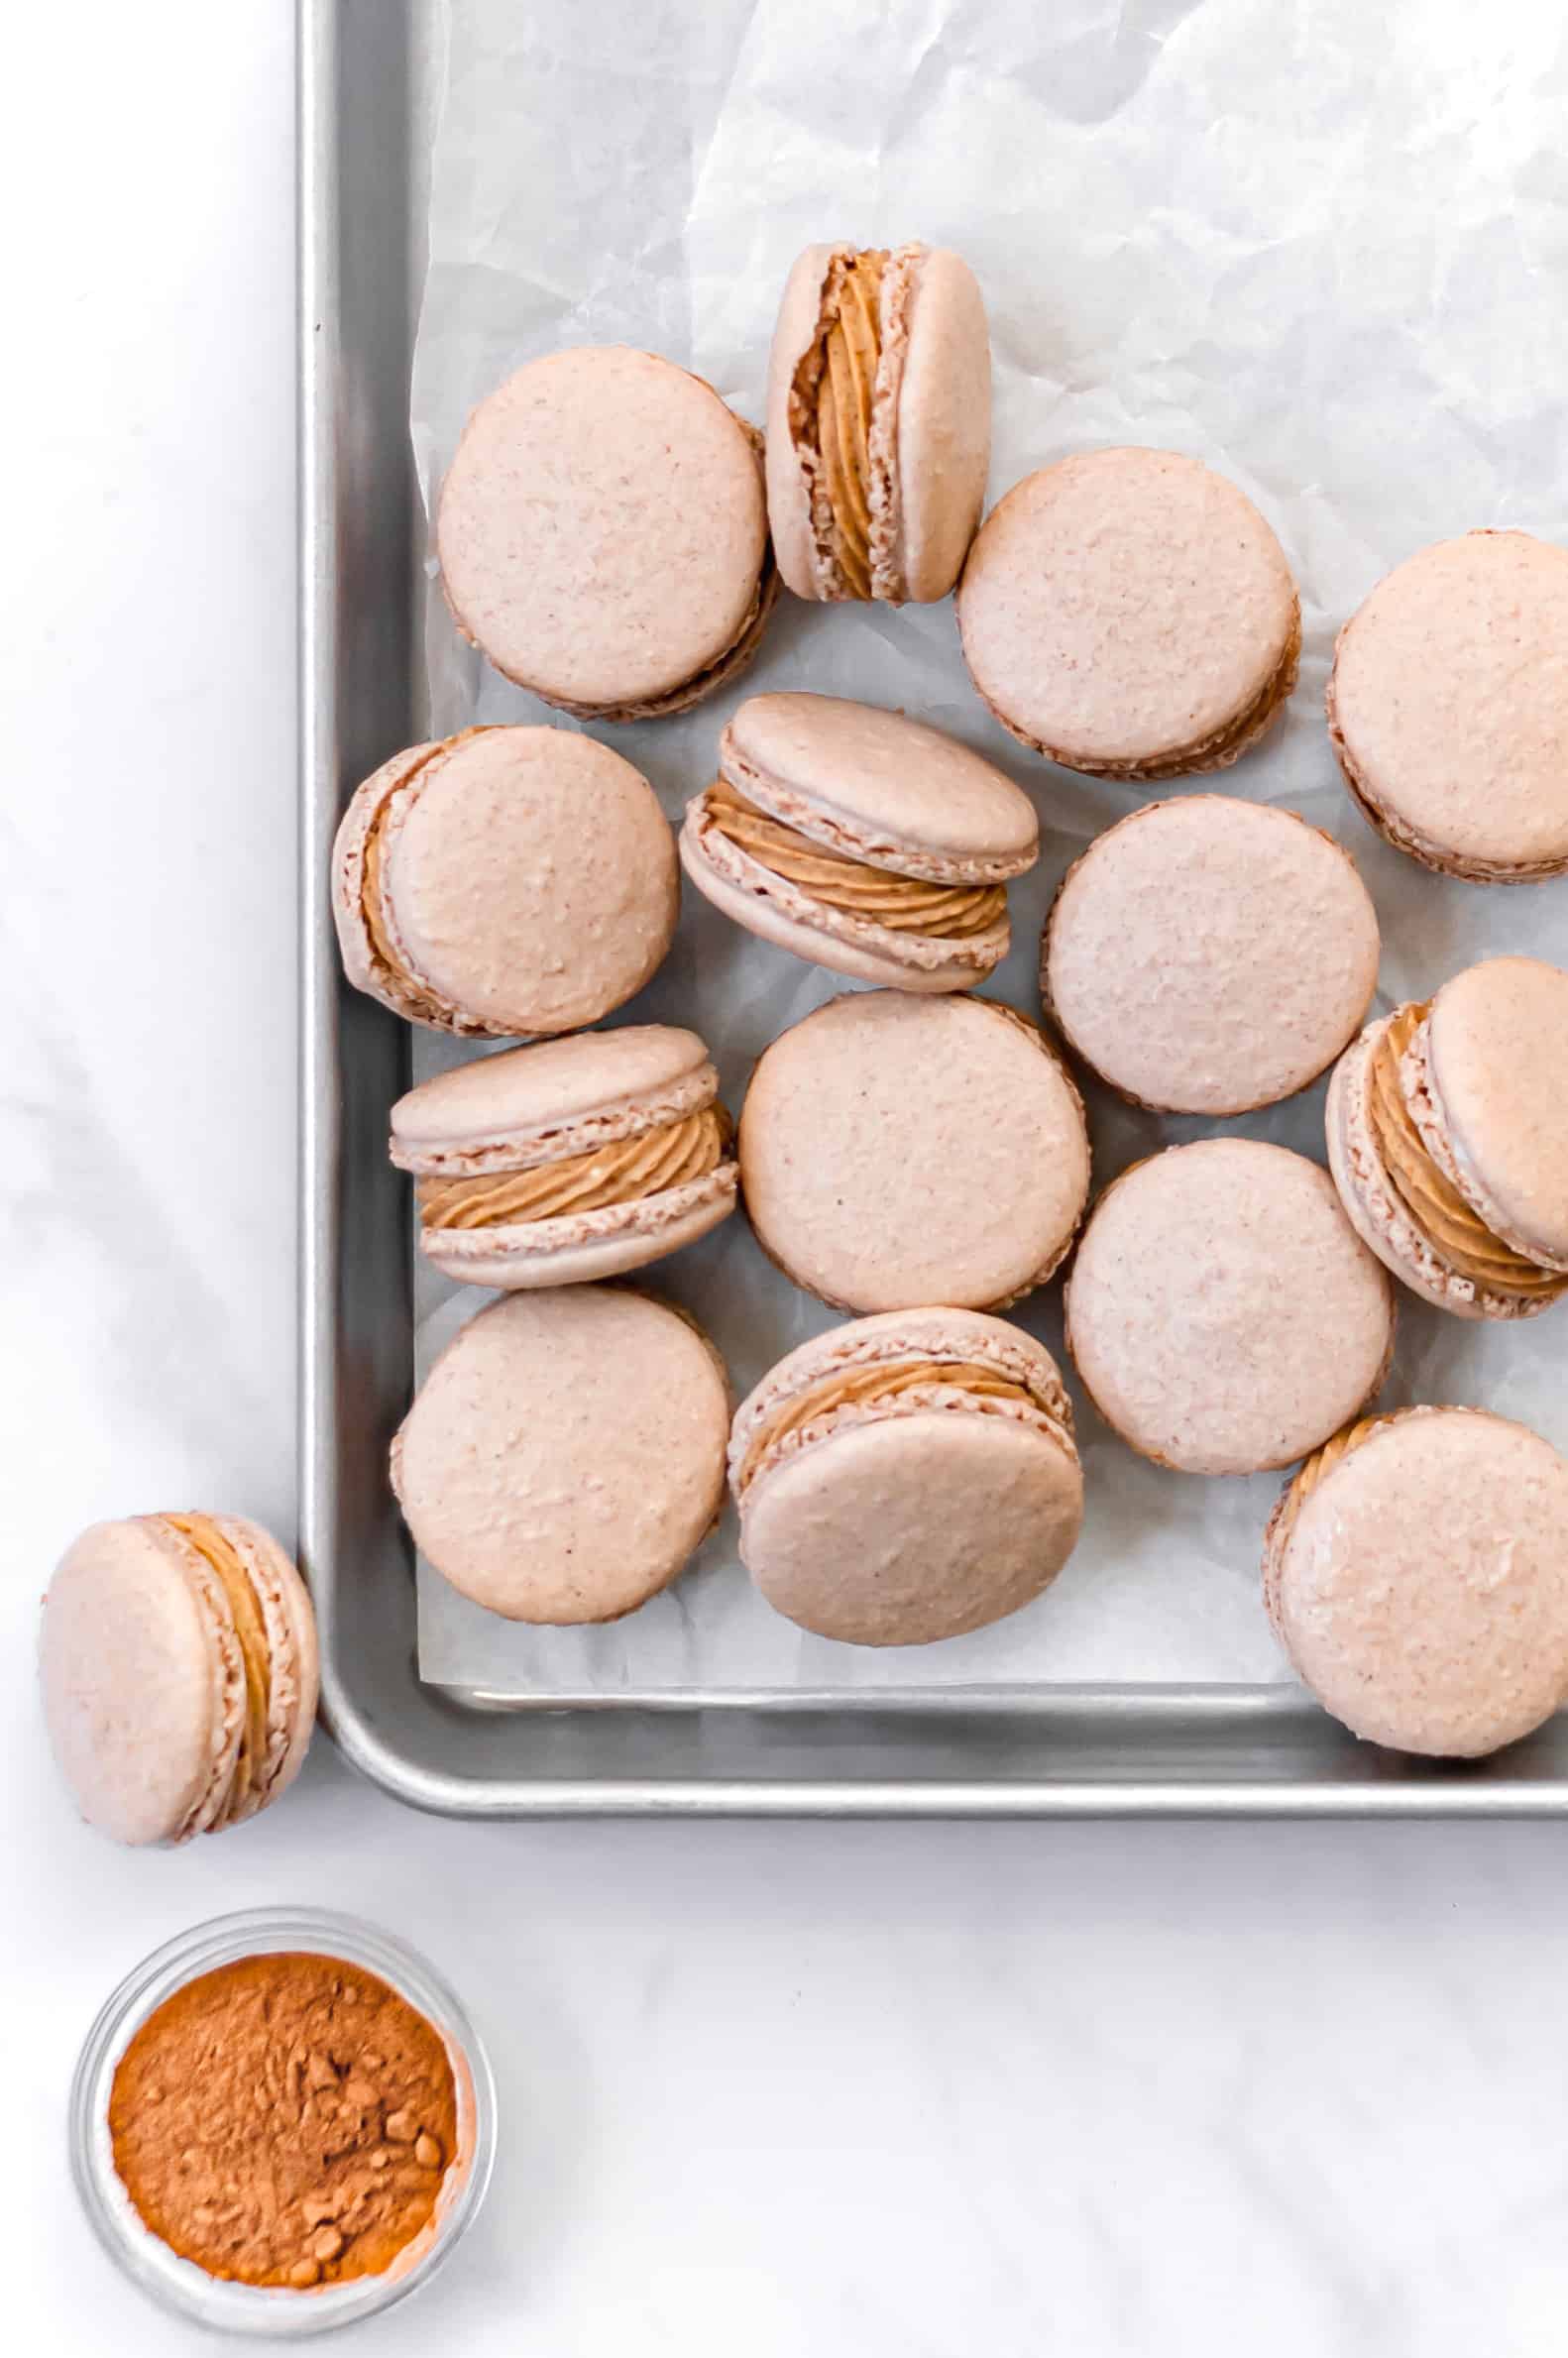 spiced macarons assembled on a baking tray with some resting on their sides.